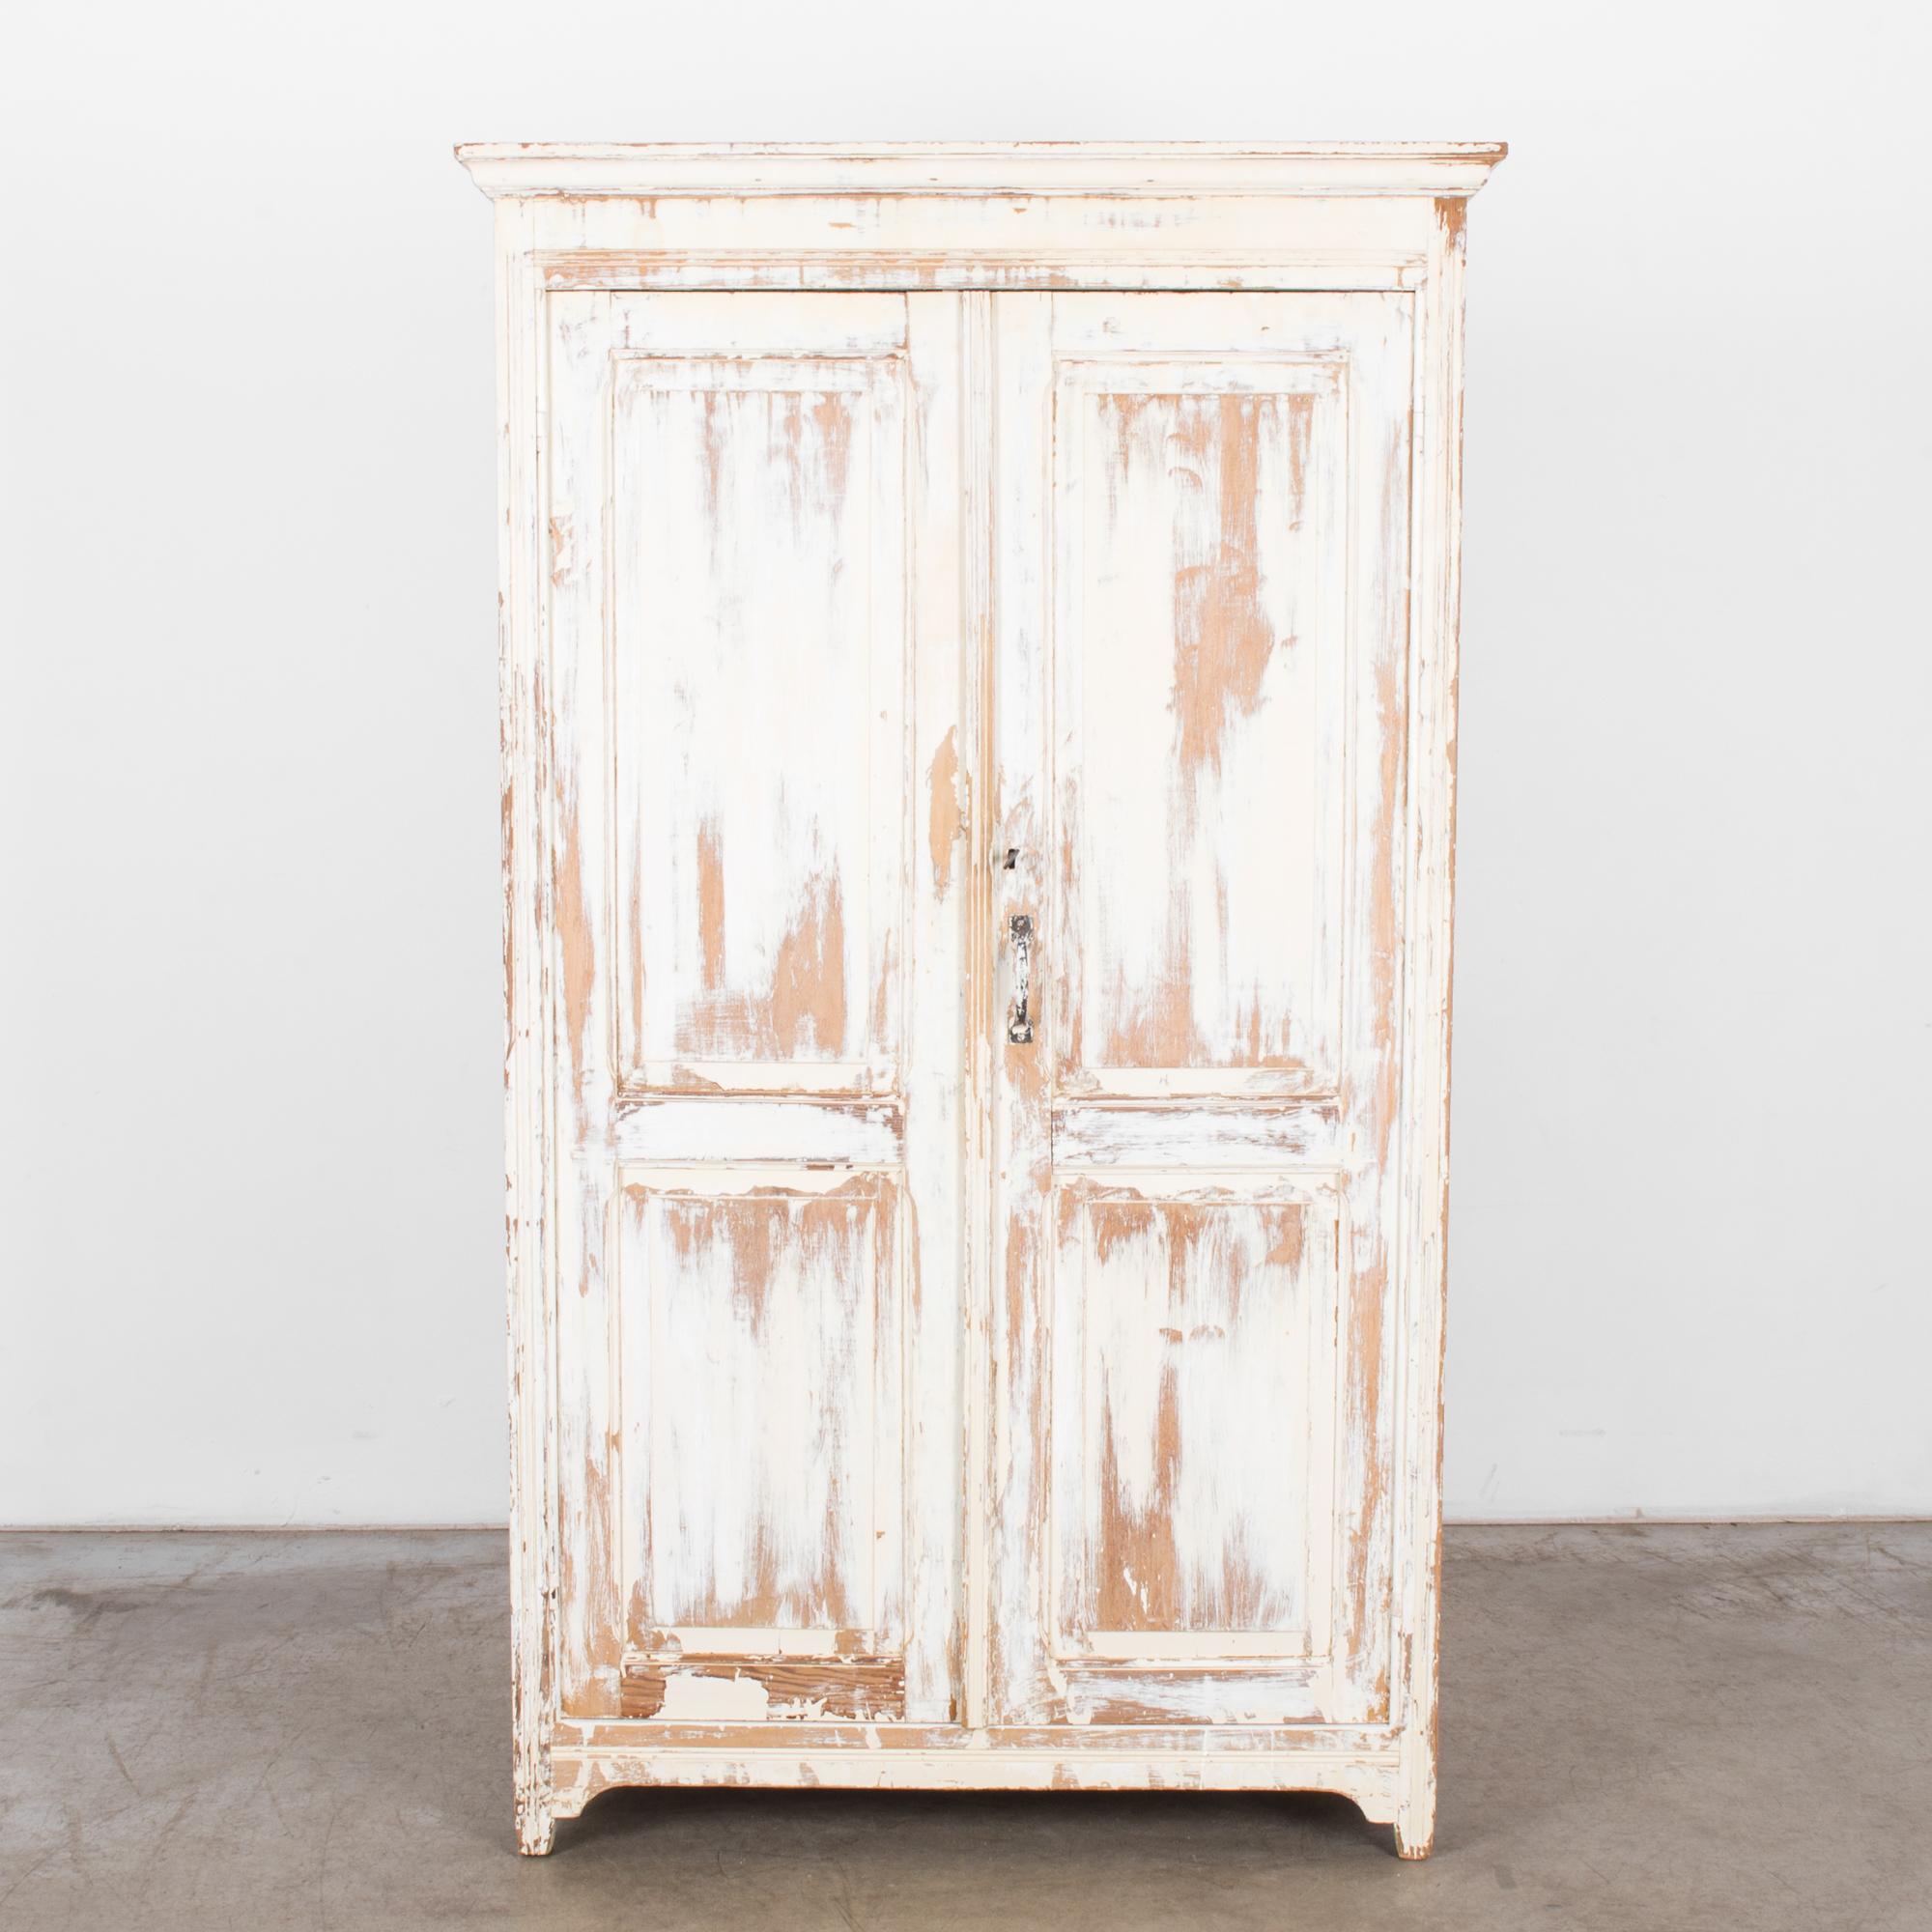 This wooden armoire with crown molding was made in Belgium. Originally painted white, the armoire displays a time-worn patina, which reveals the golden hues of the wood beneath and evokes the rustic charm of the countryside. The armoire is slightly